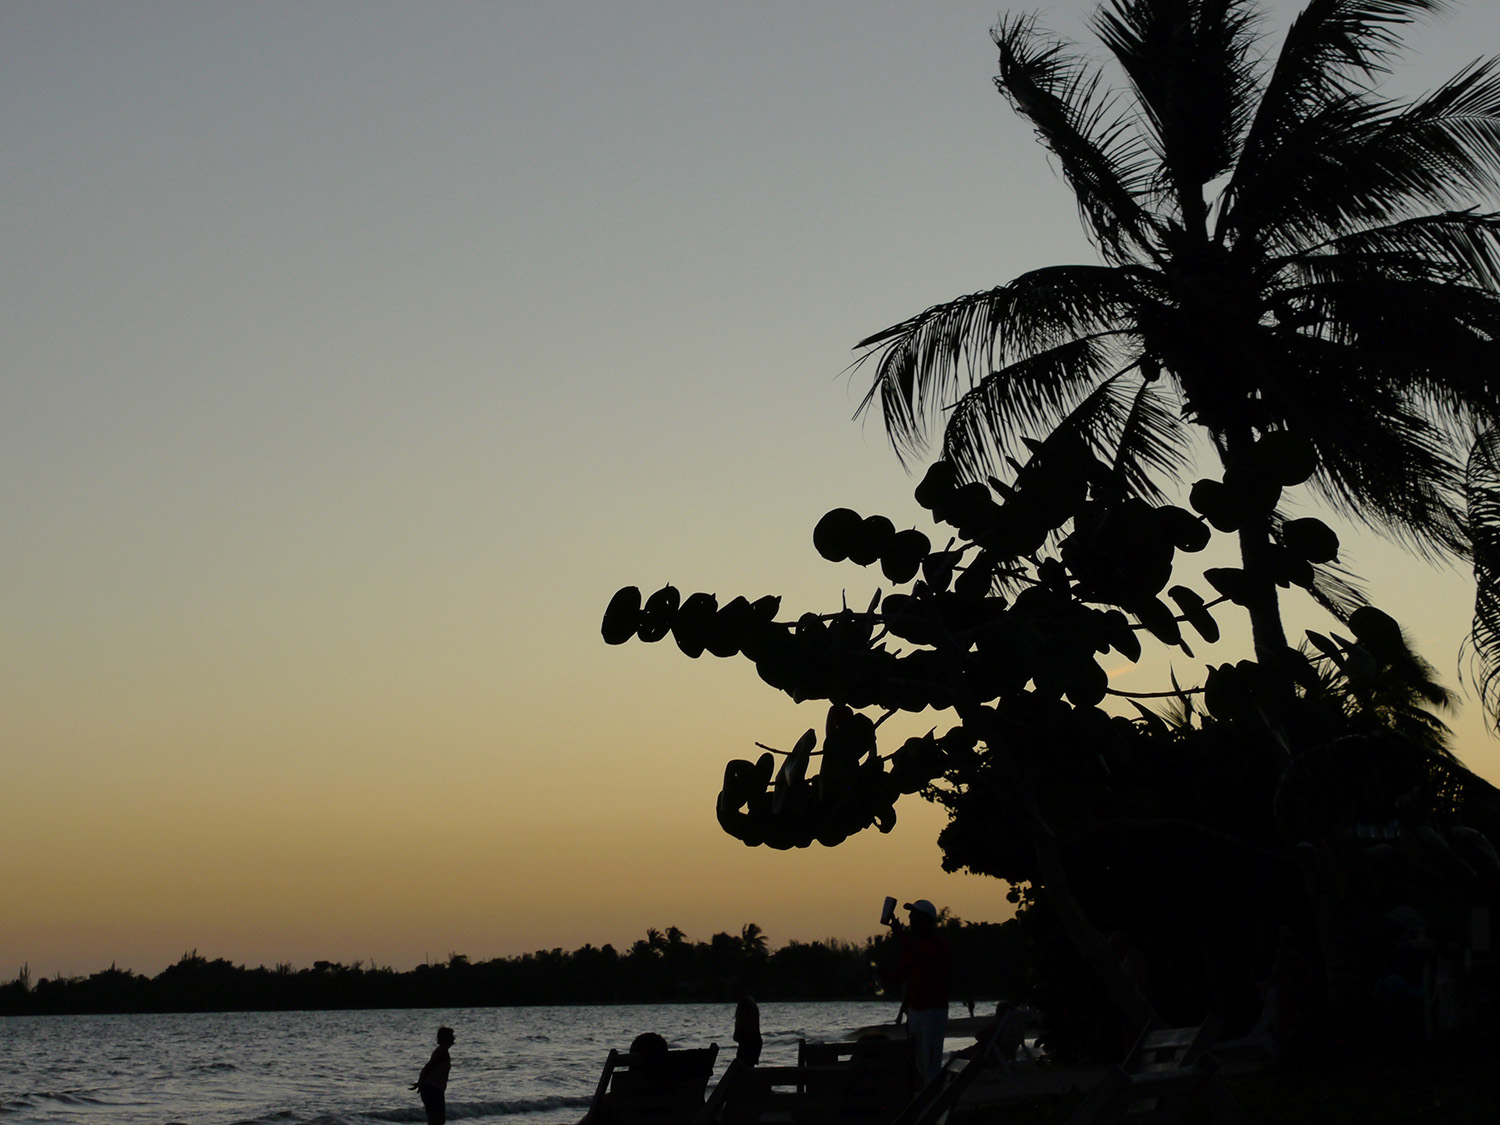 A silhouette of a palm tree with coconuts at sunset.